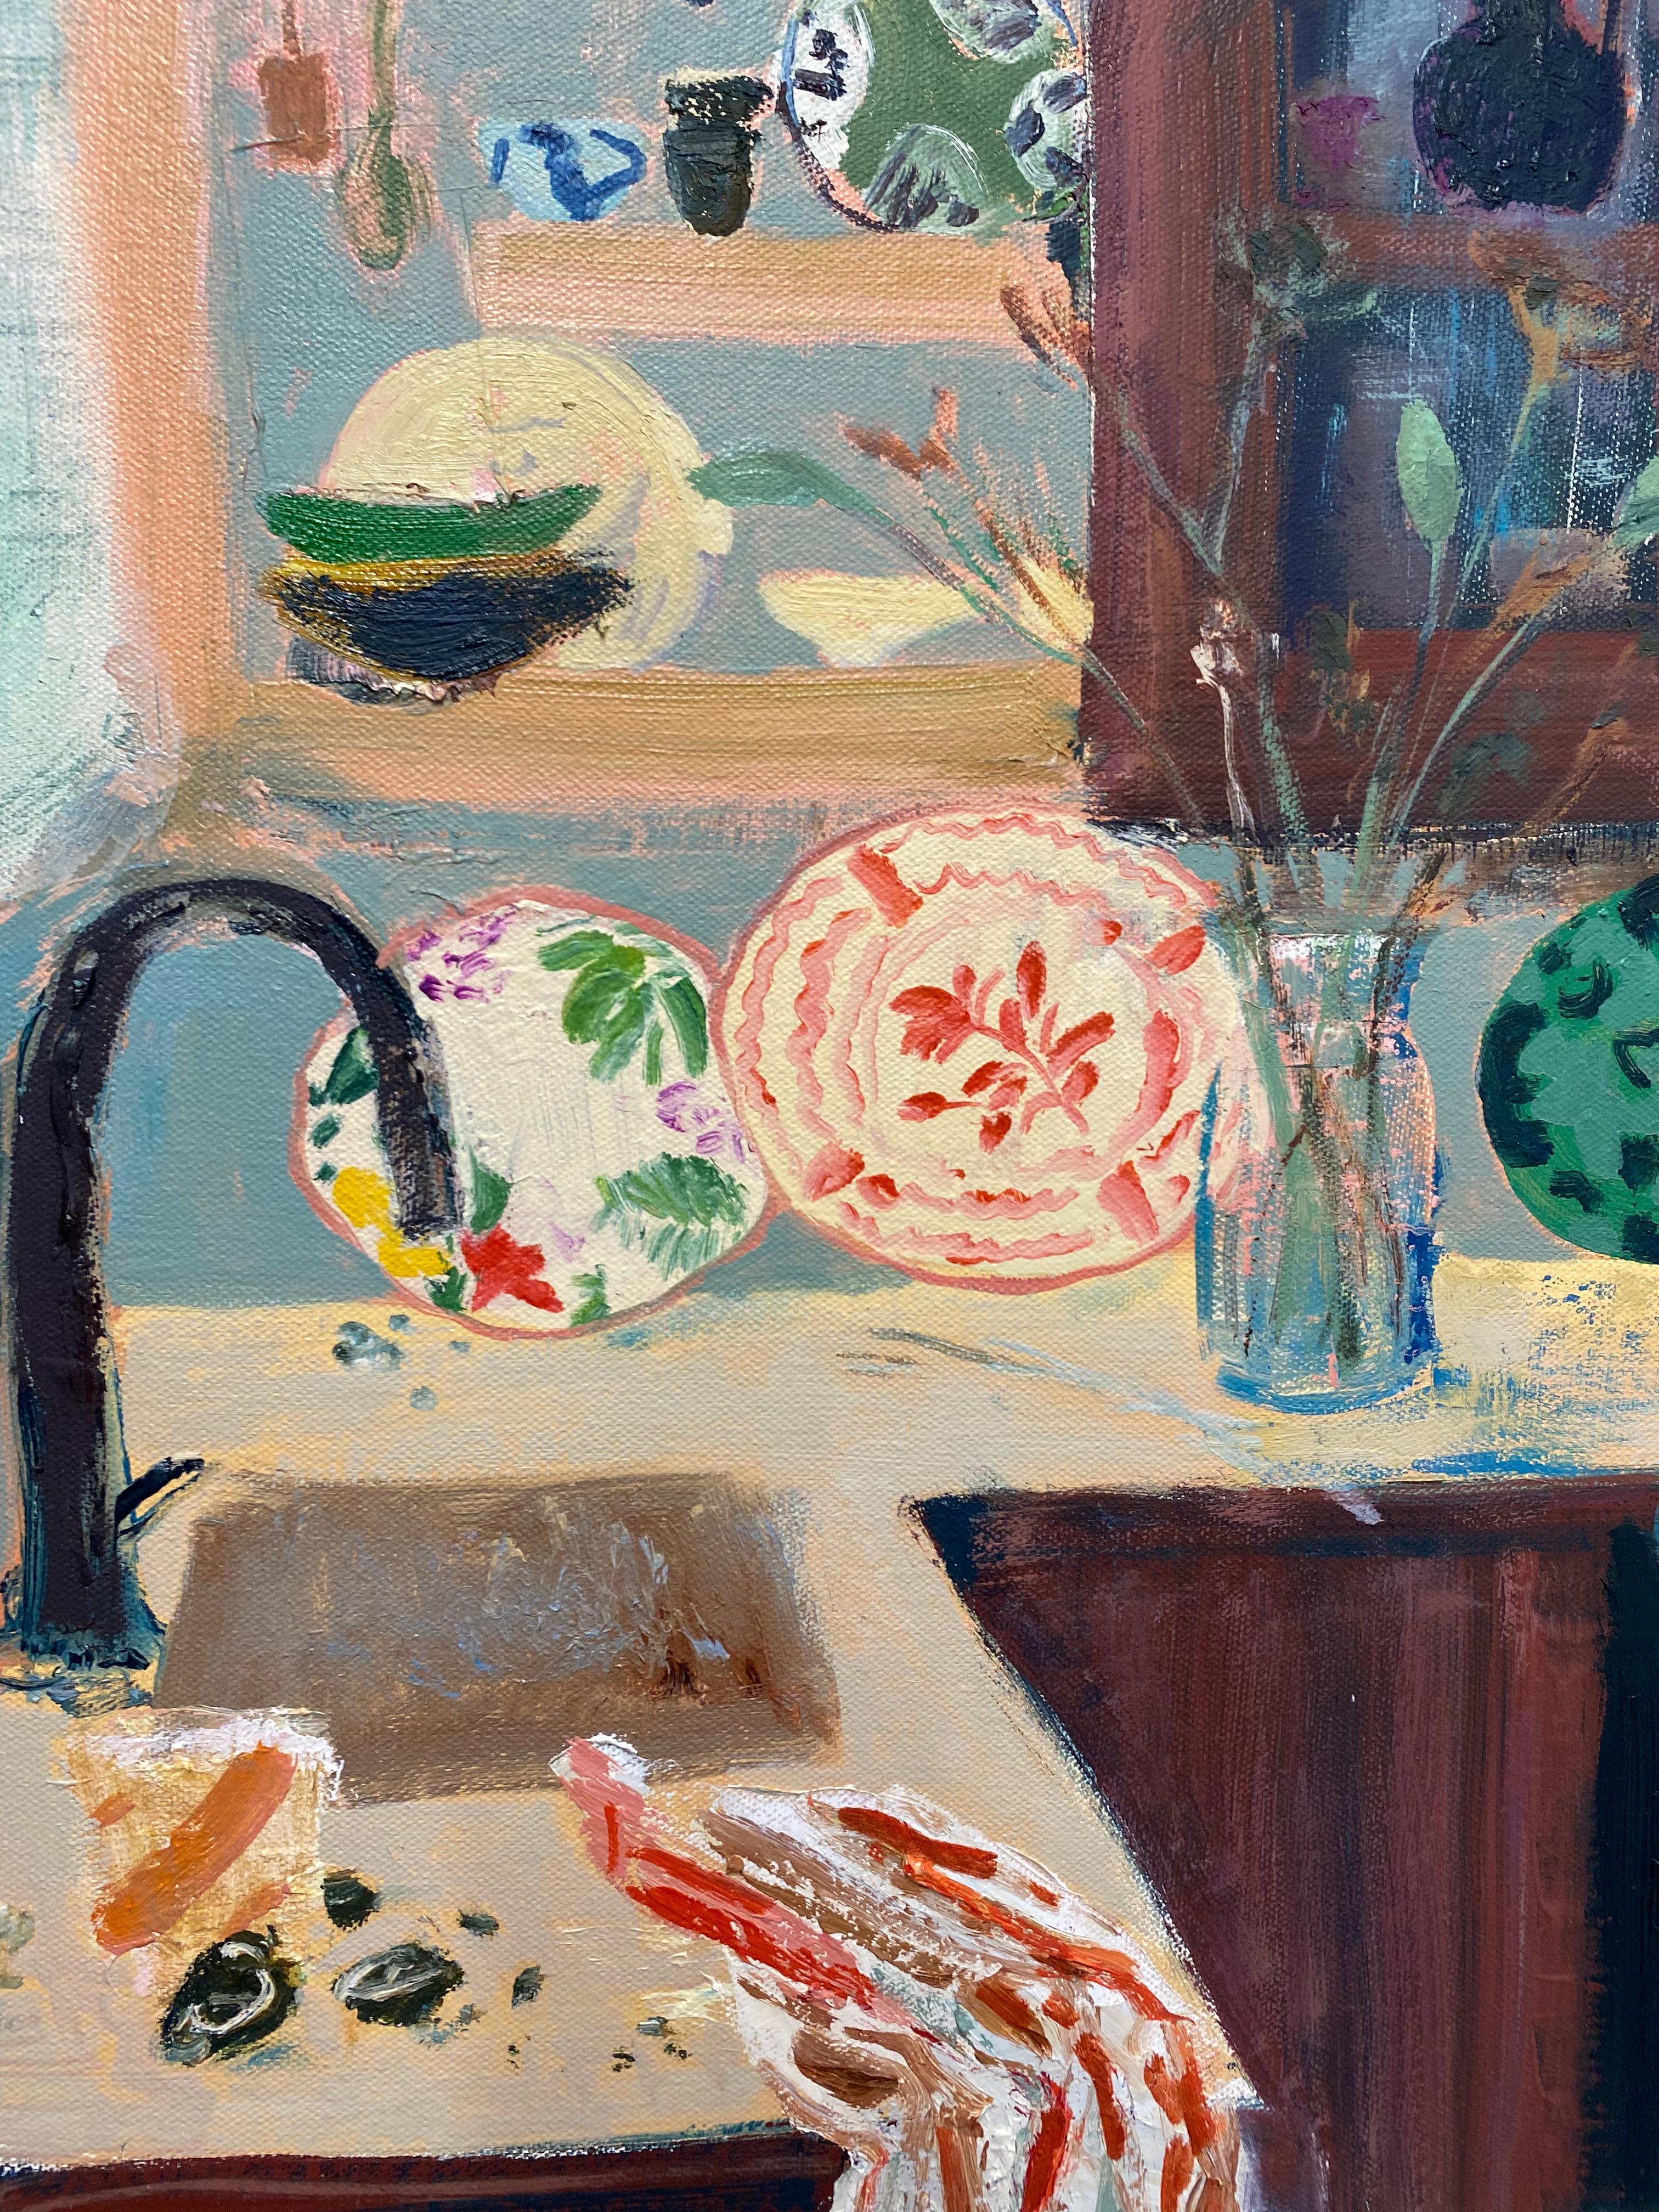 Nellie Lake, Kitchen, Patterned Plates, Red Teapot, Teacups, Flowers, Botanical - Contemporary Painting by Melanie Parke